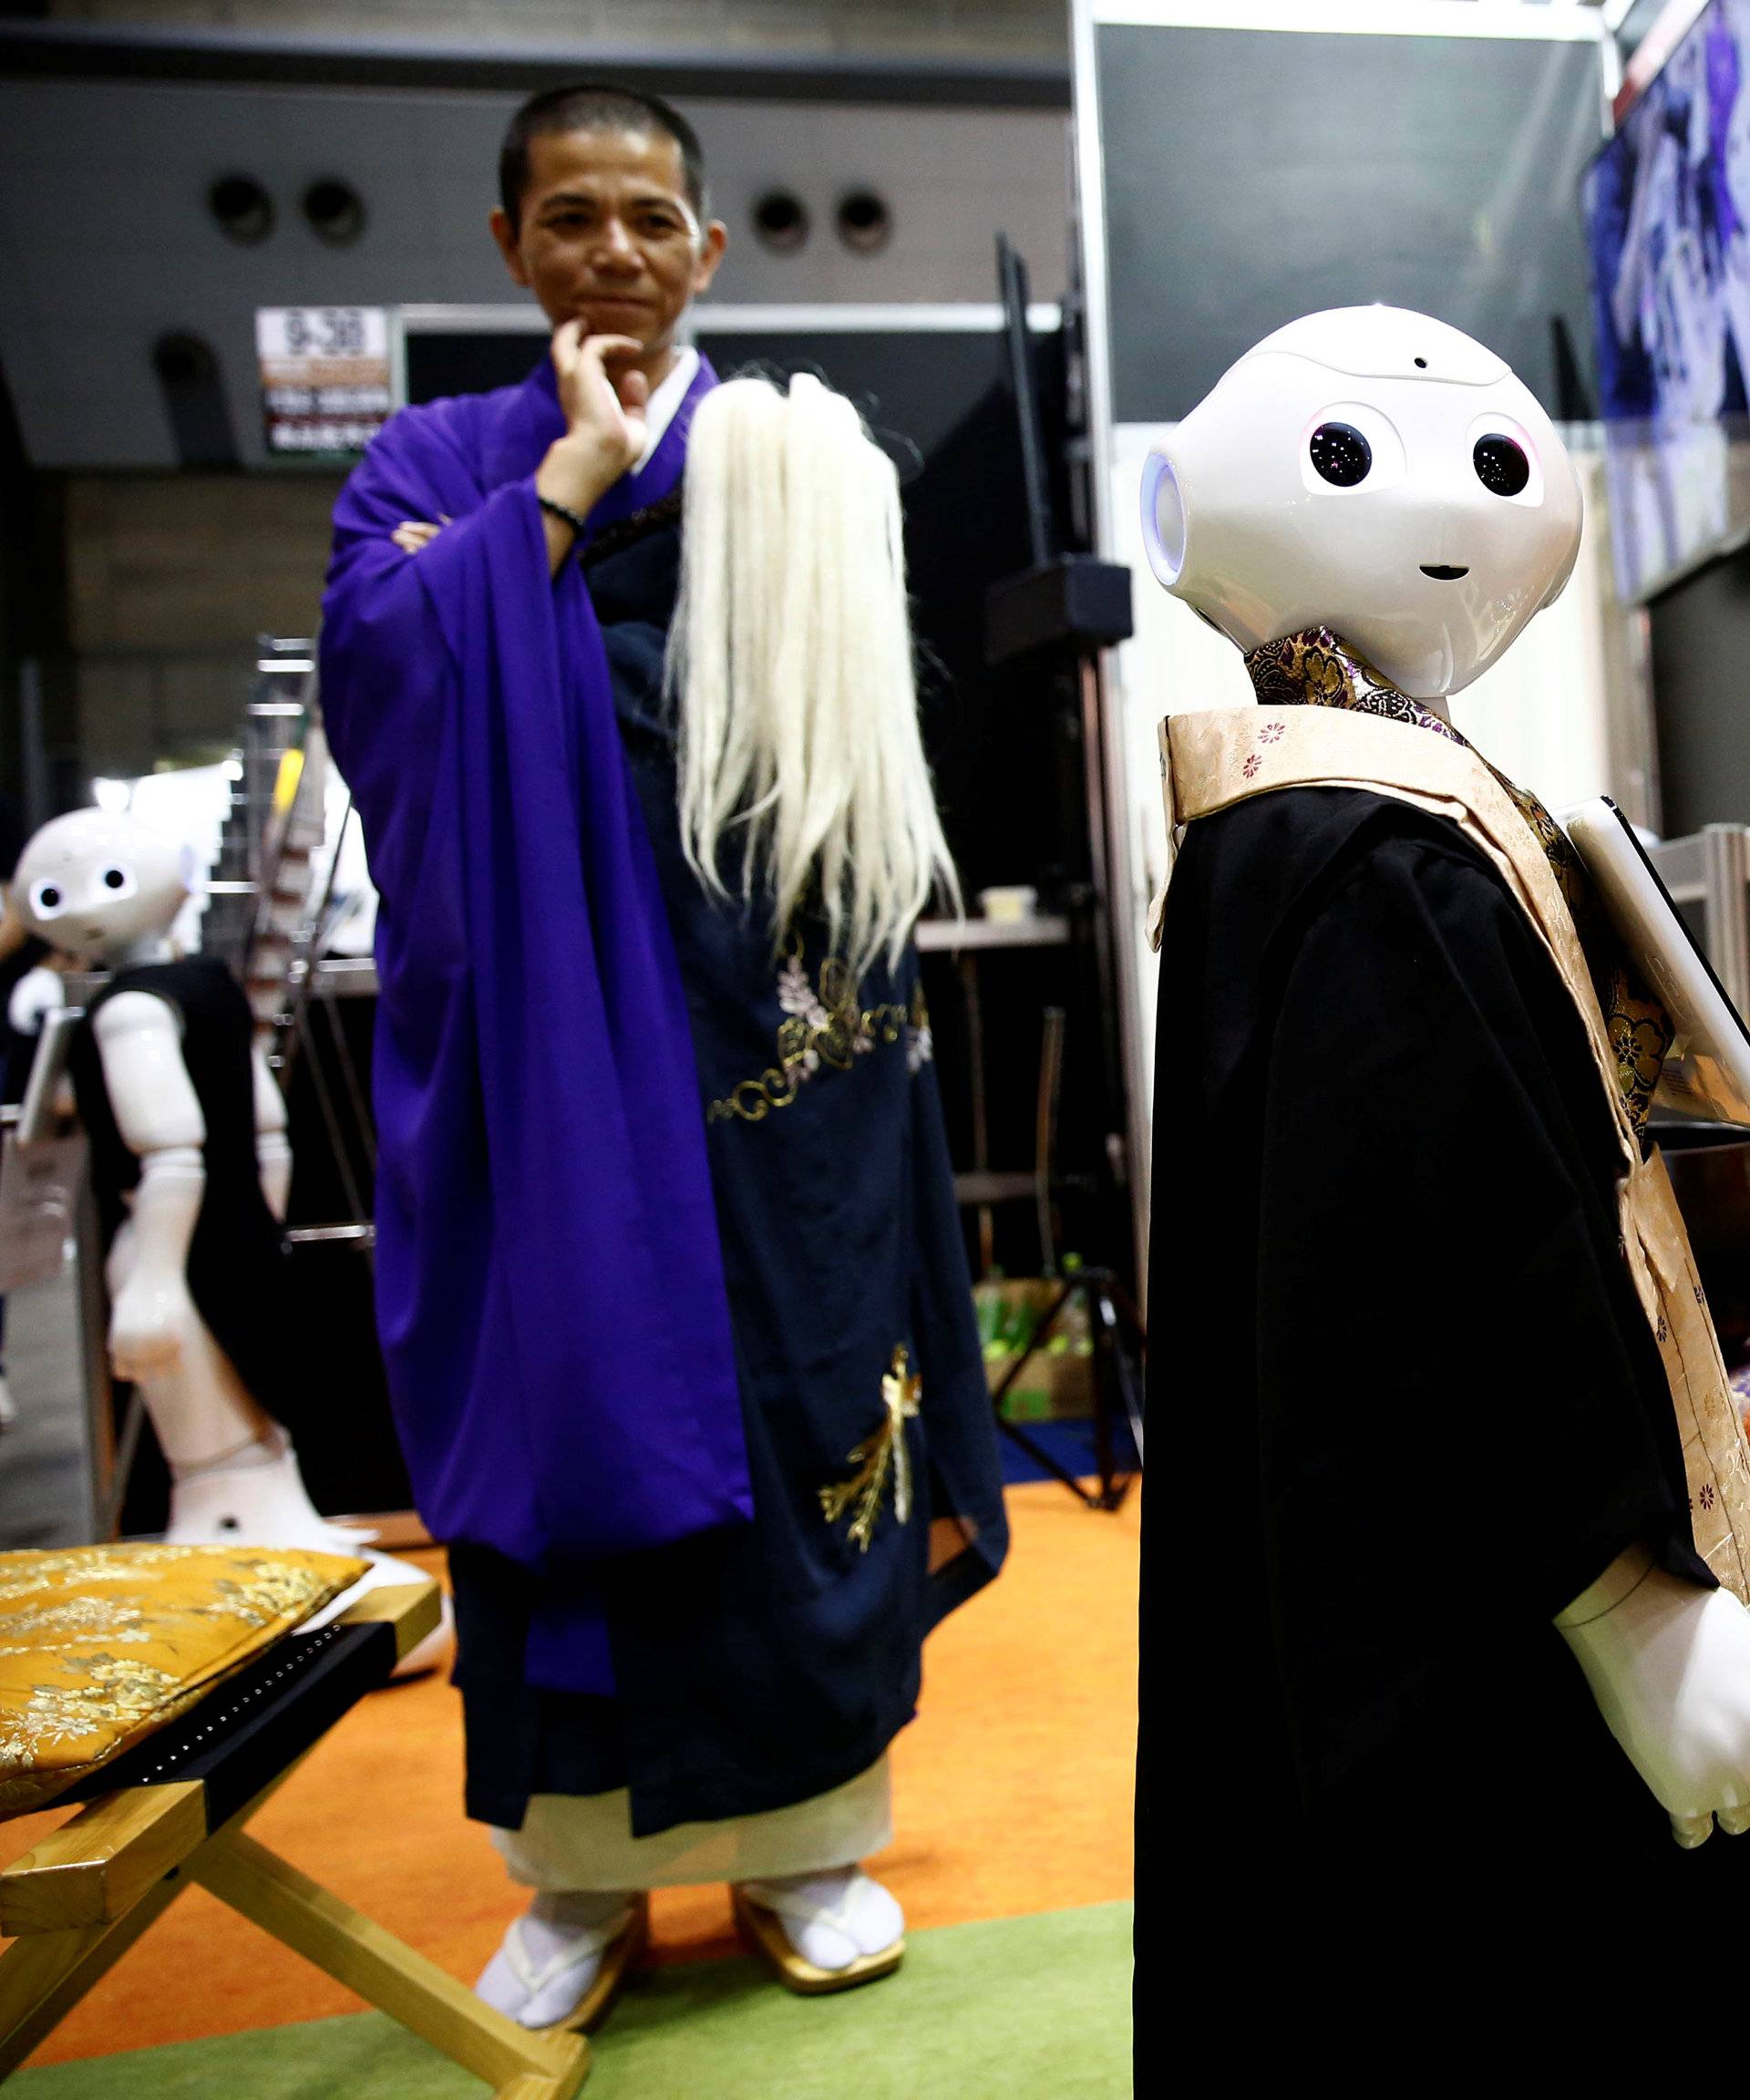 A Buddhist monk looks at a 'robot priest' wearing a Buddhist robe during its demonstration at Life Ending Industry EXPO 2017 in Tokyo